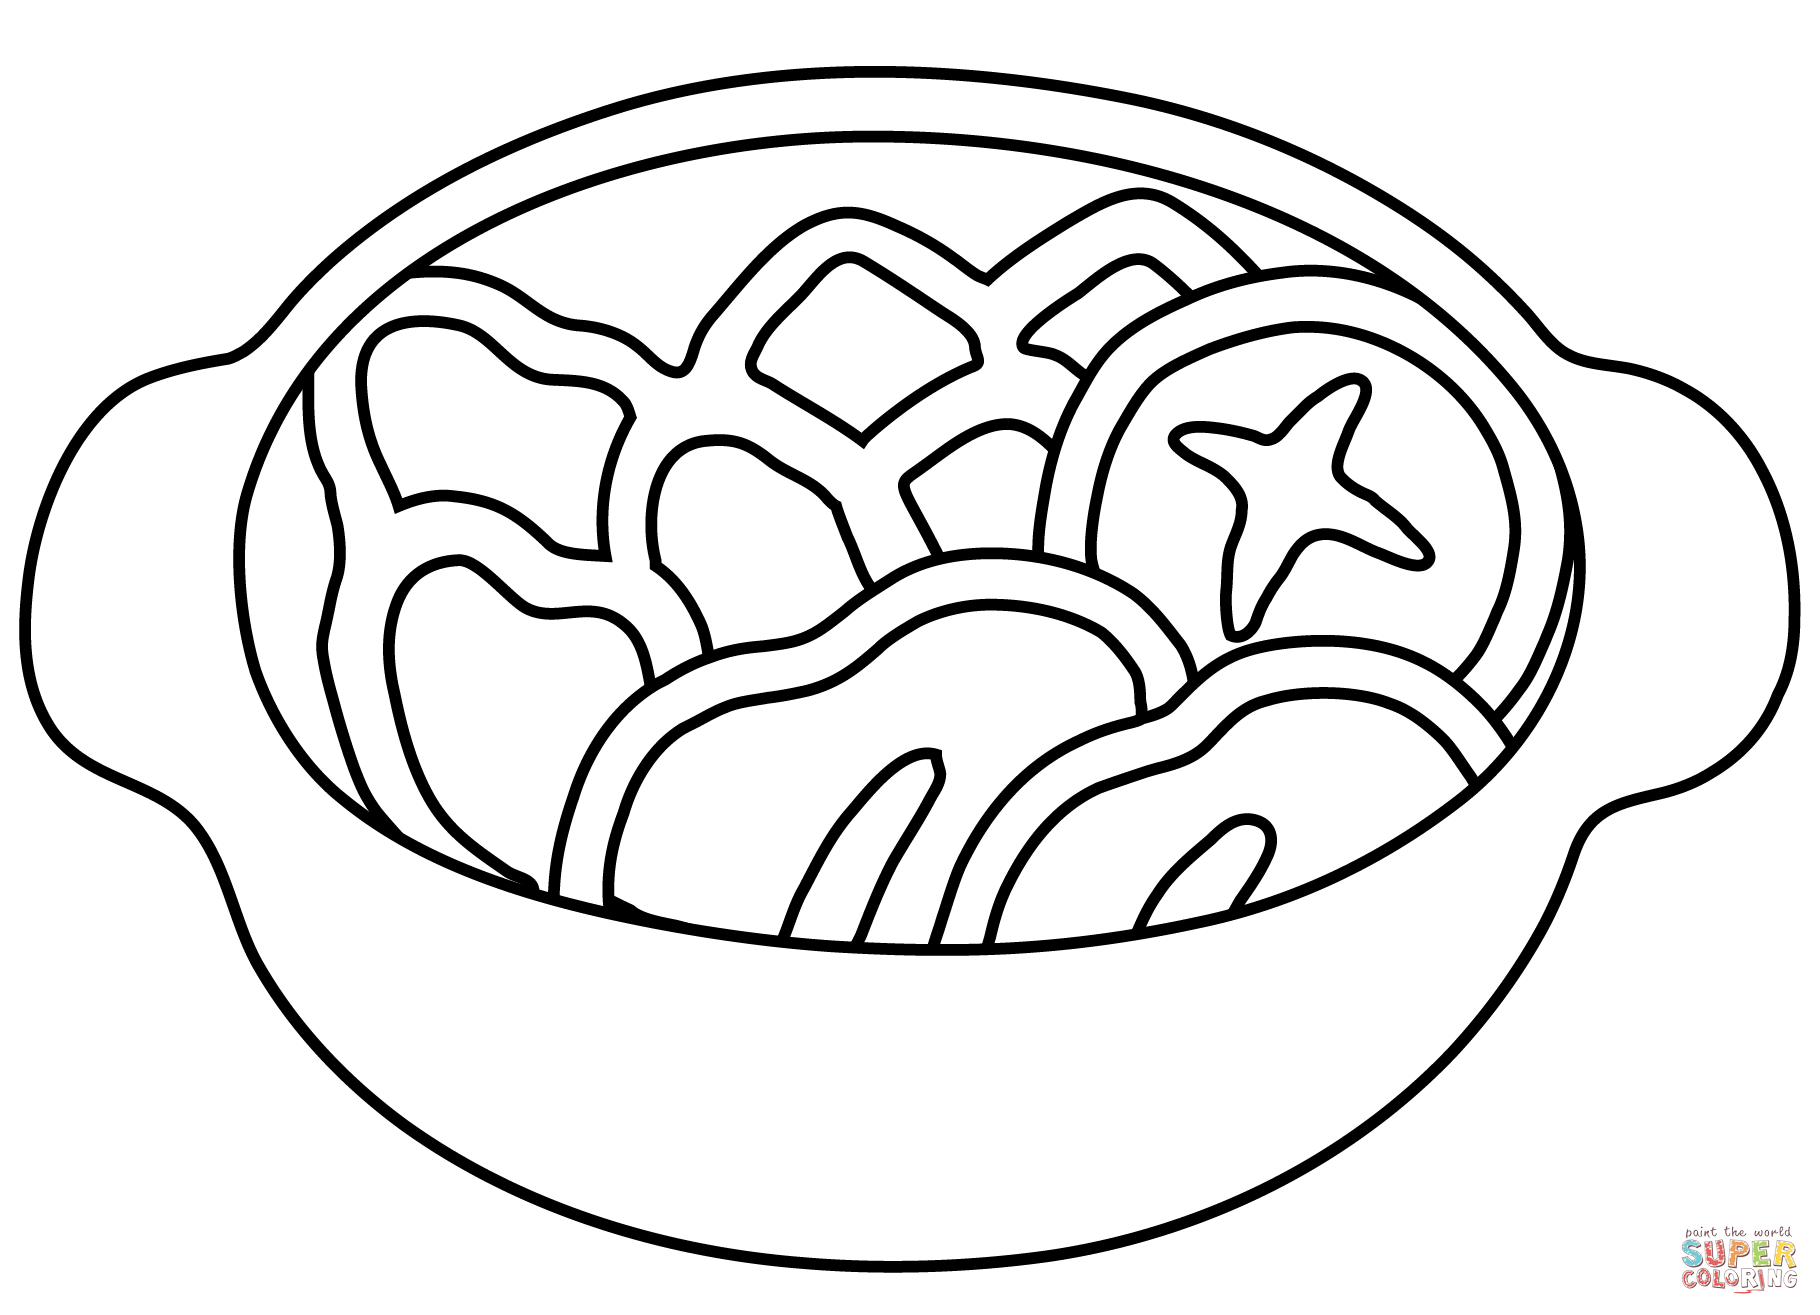 Pot of food emoji coloring page free printable coloring pages